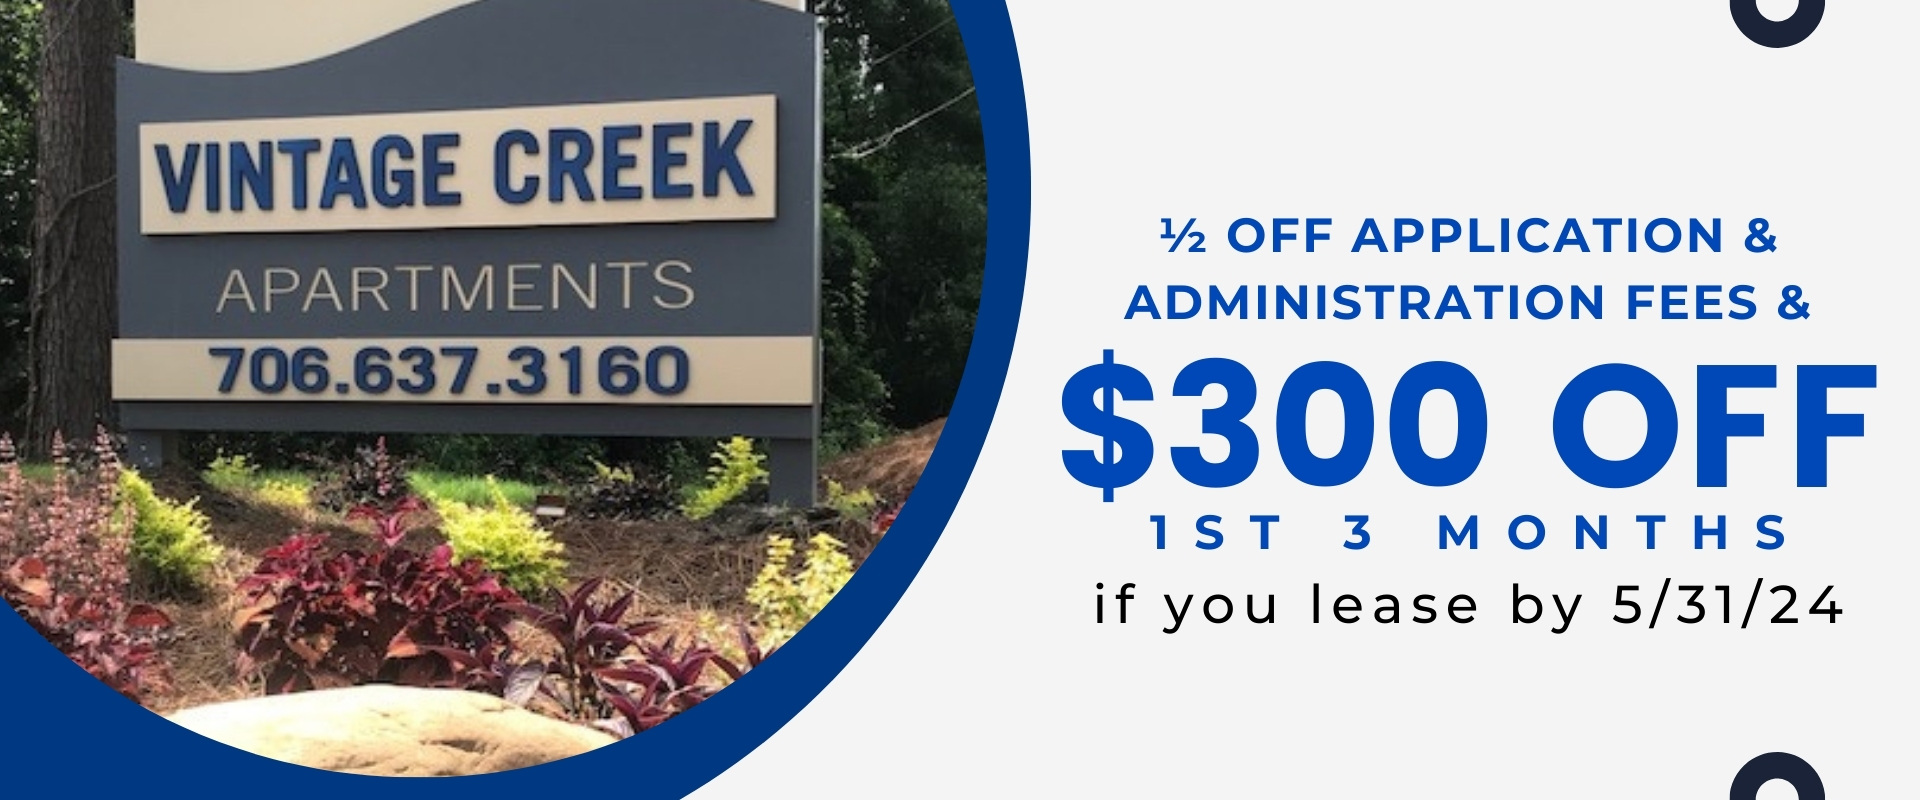 ½ off Application & Administration Fees & $300 off 1st 3 months if you lease by 5/31/24.